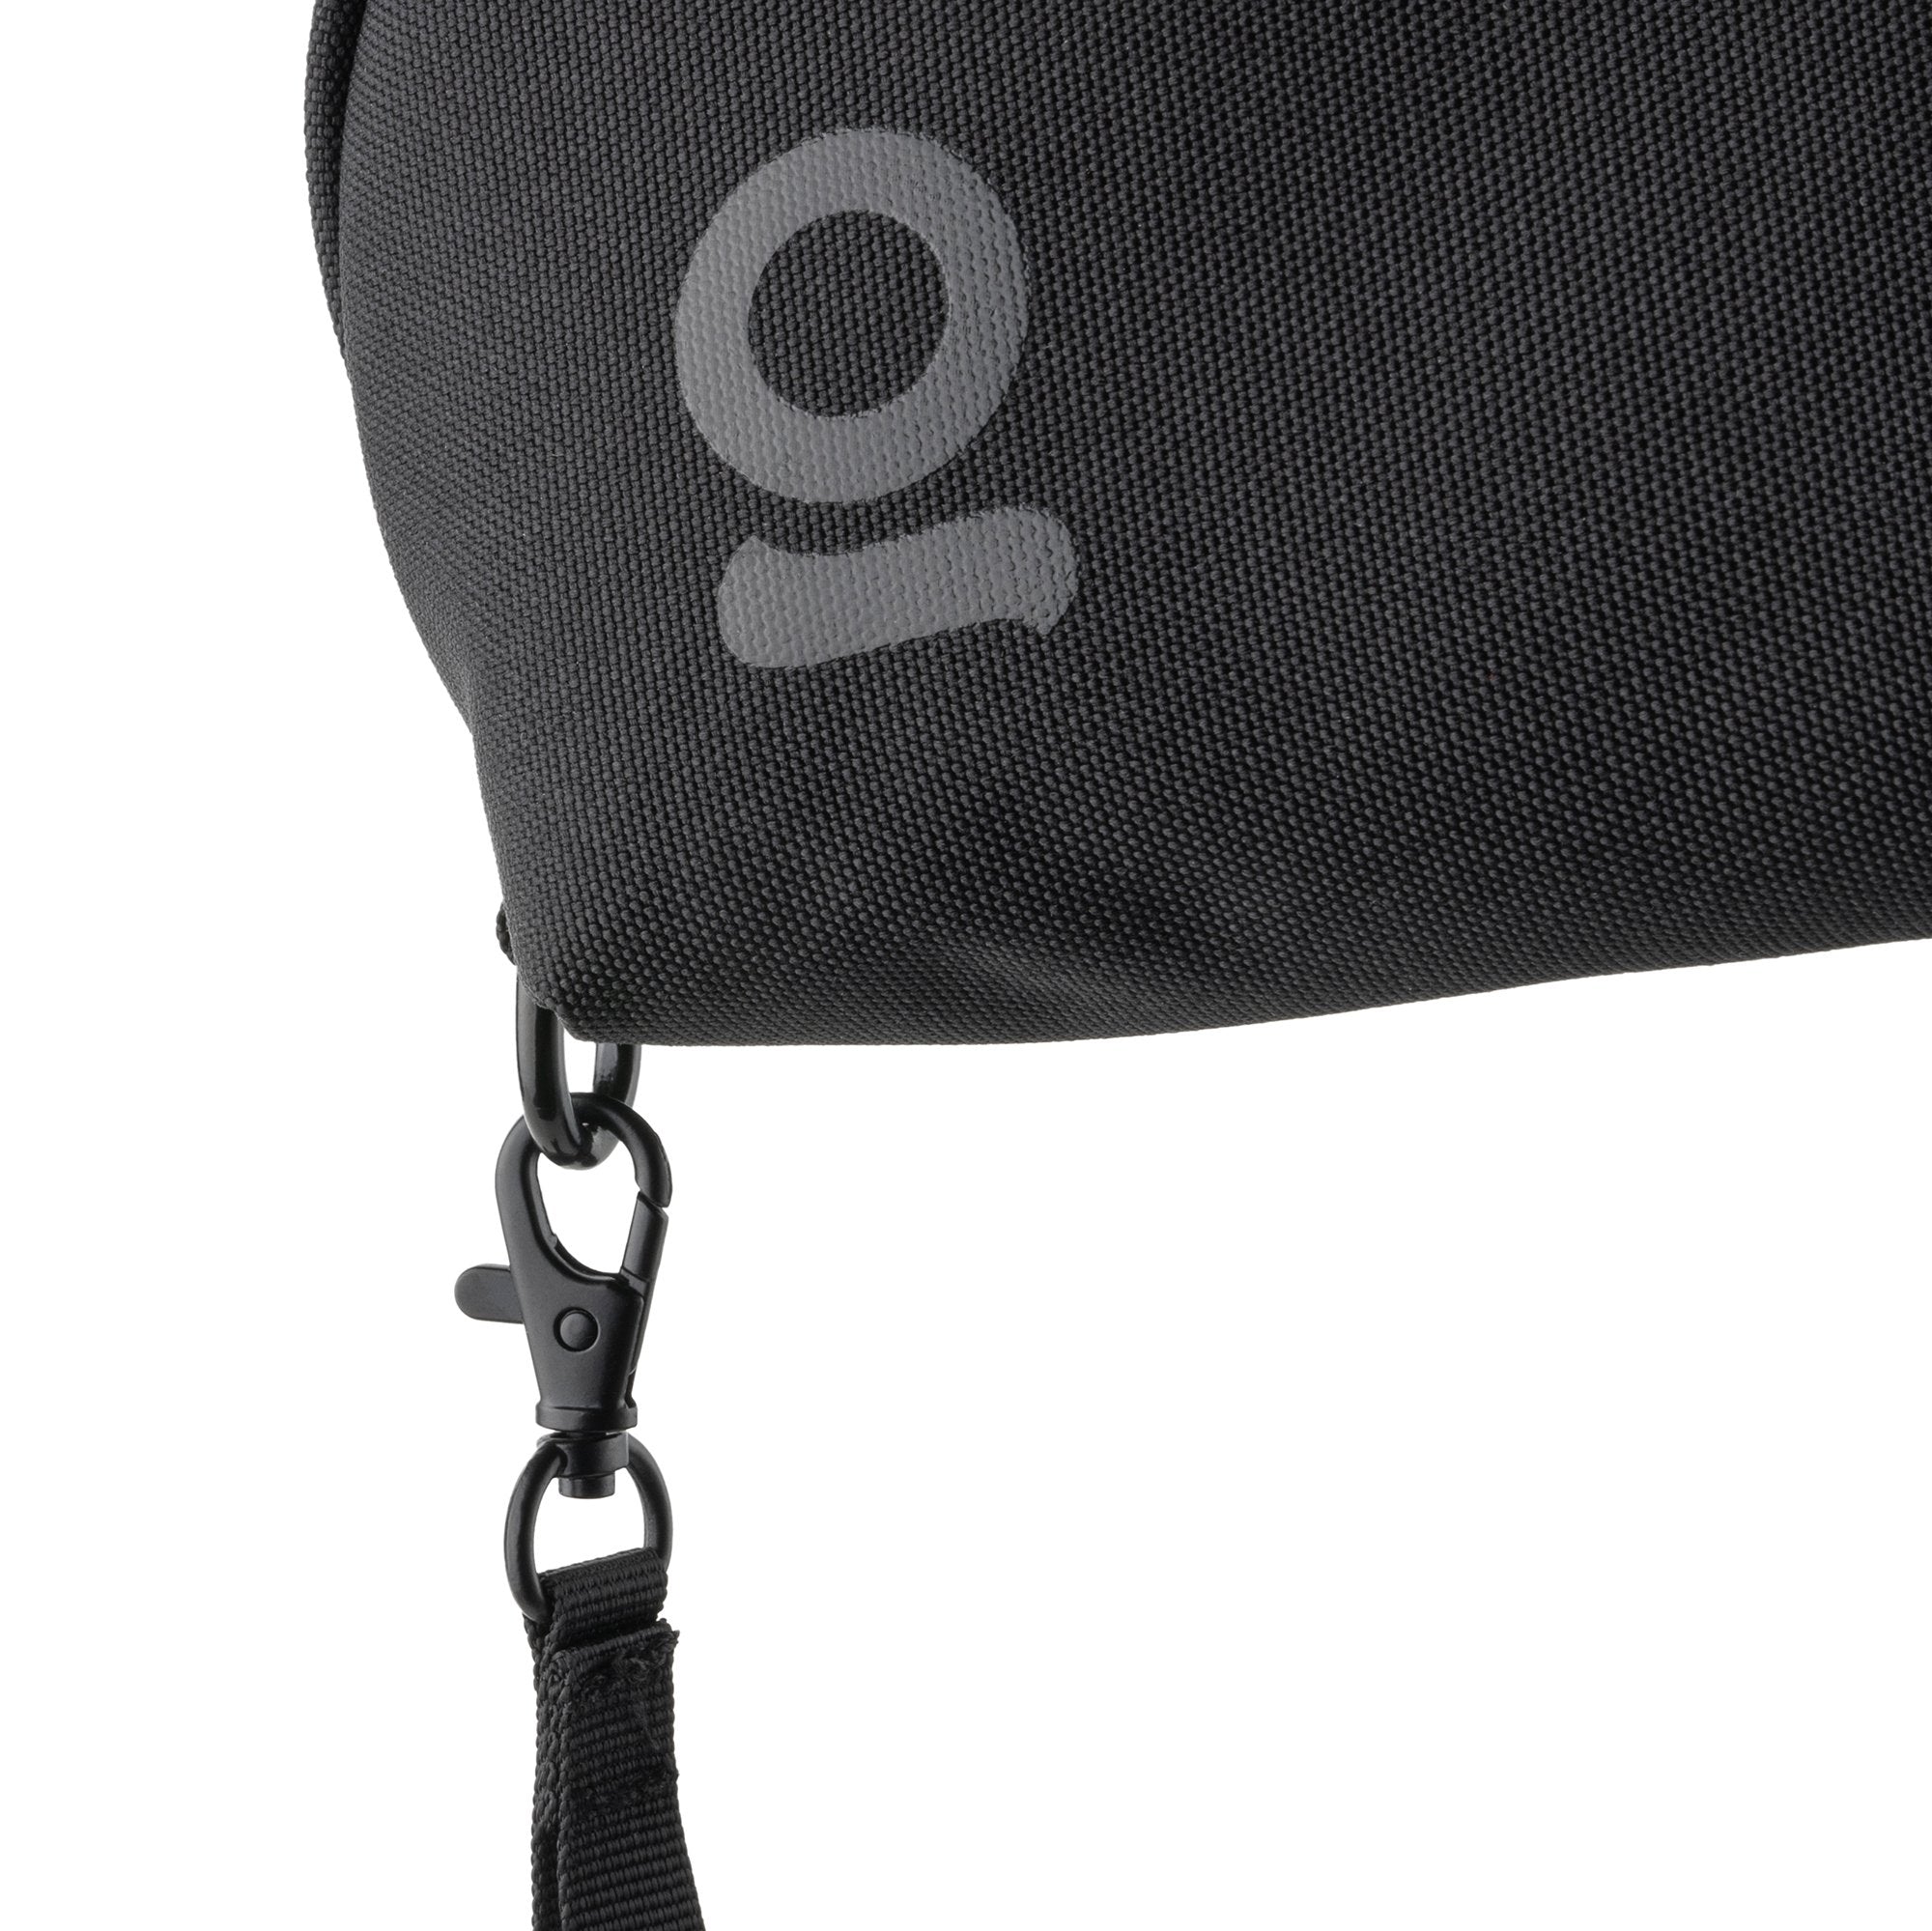 Ongrok Carbon-lined Smell Proof Wrist Bag